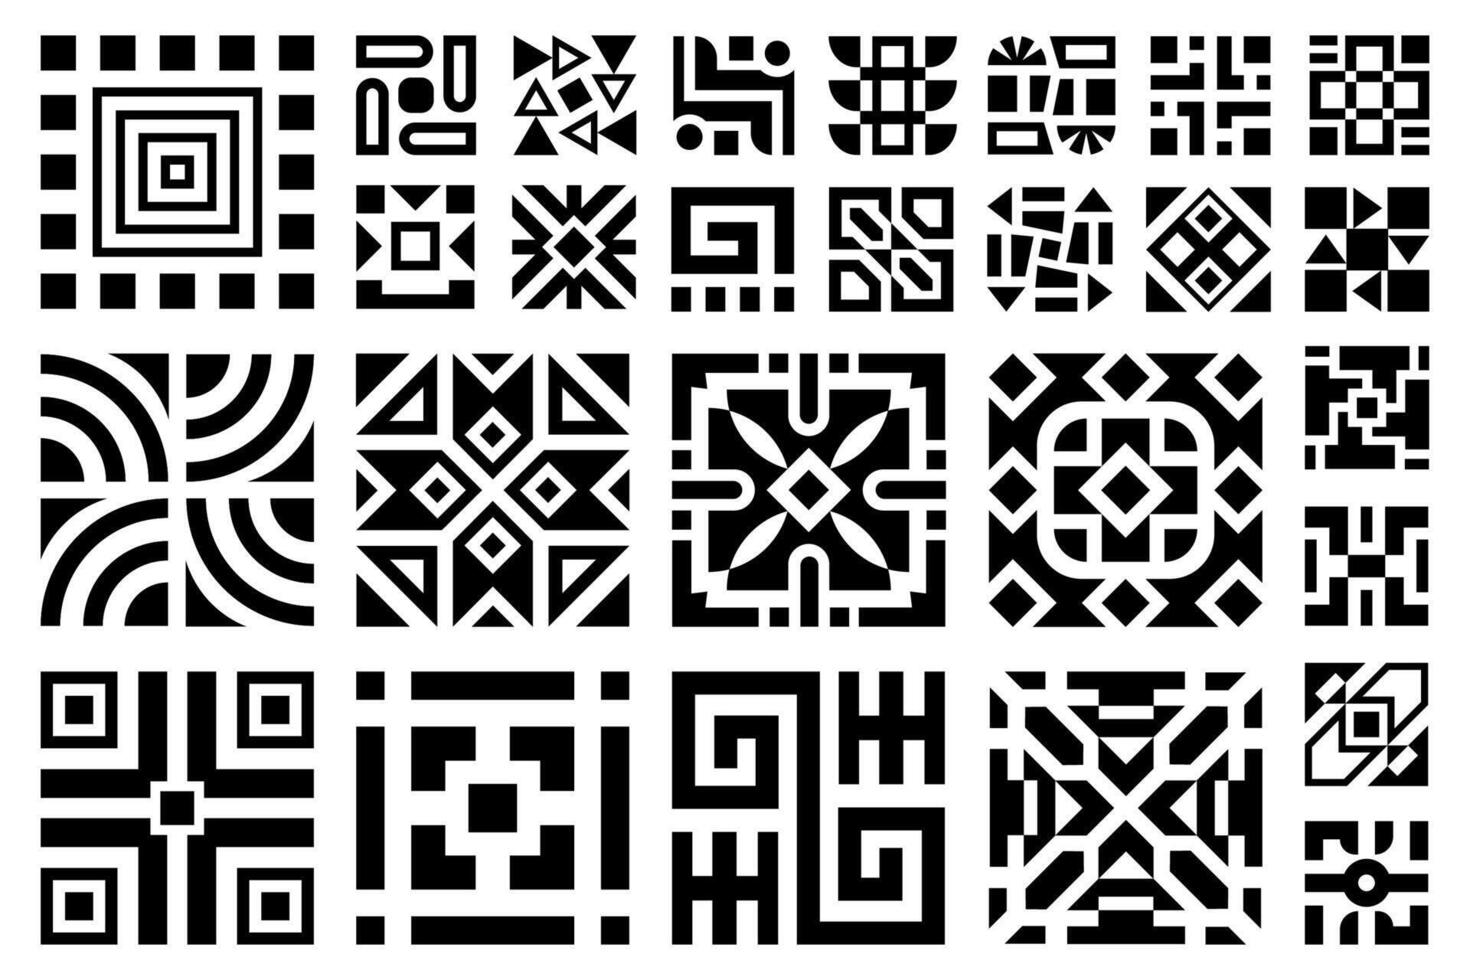 Ornamental vintage square patterns collection. Abstract mosaic black and white ornamental design elements, geometric patterns set. vector